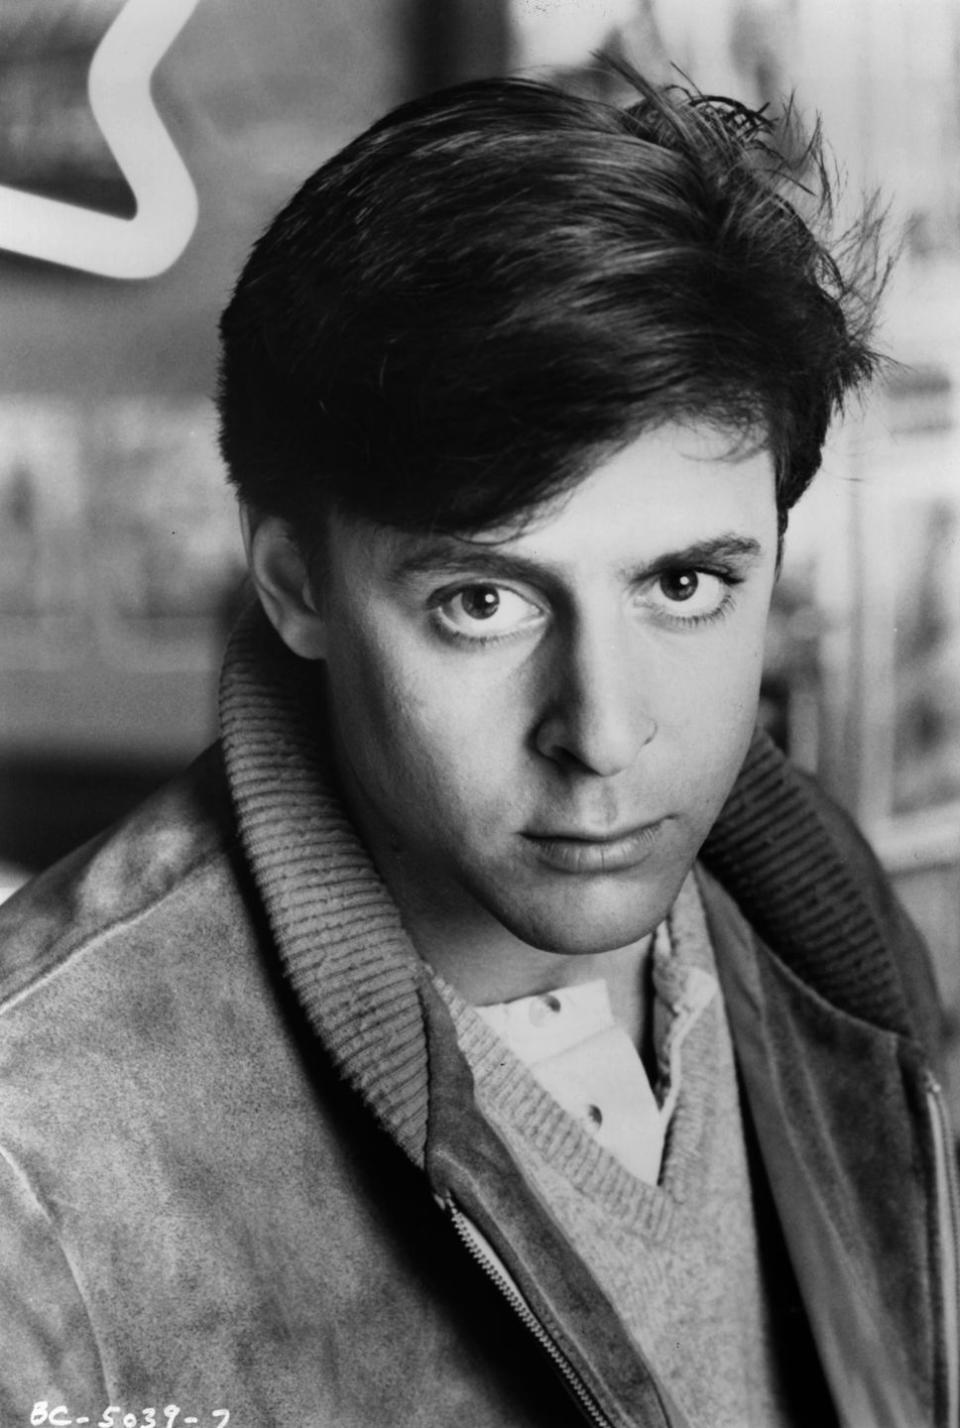 <p>This brooding guy launched his career in the classic '80s hit <em>The Breakfast Club</em> as John Bender, a.k.a. the bad boy of the bunch. Soon after, he costarred in <em>St. Elmo's Fire</em><span class="redactor-invisible-space"> (1985) alongside fellow Brat Pack members Emilio Estevez, Ally Sheedy, and Andrew McCarthy.</span></p>